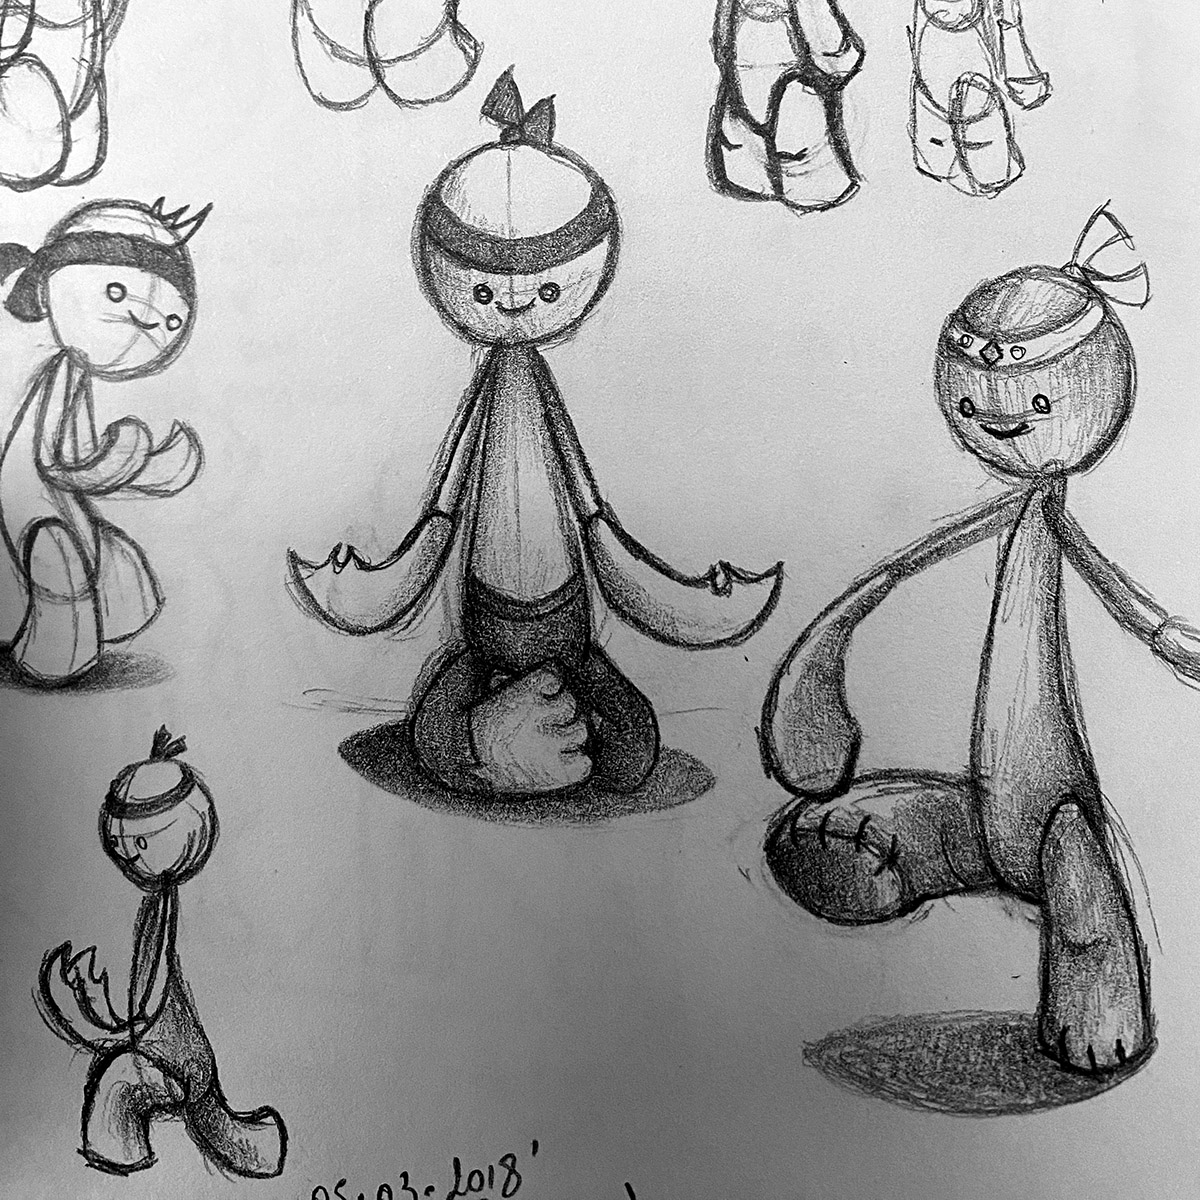 Concepting a puppet